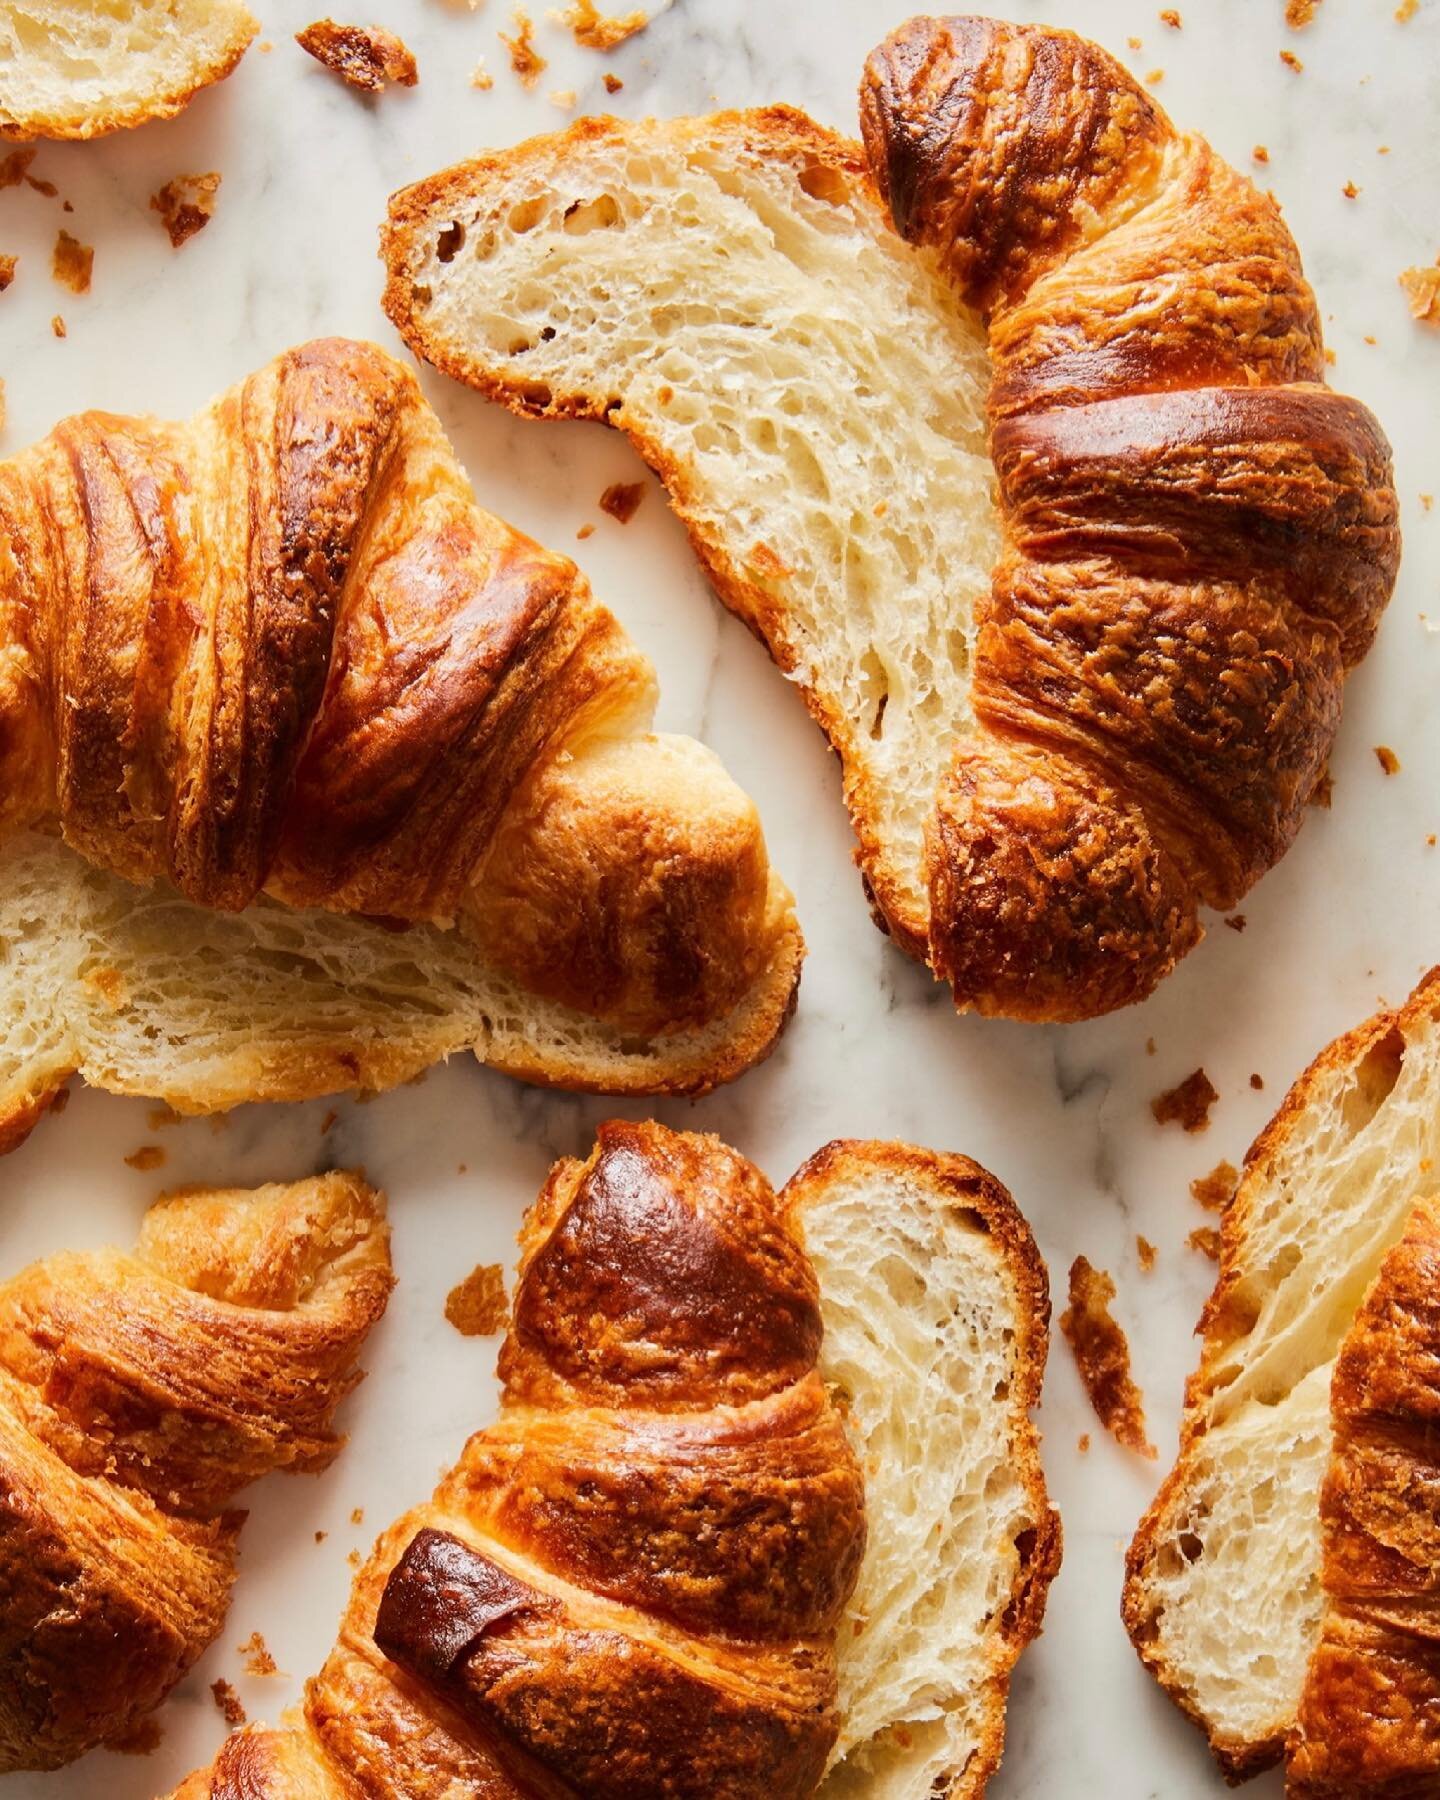 Ready to try your hands at yeasted puff pastry? My recipe is available now on @food52, along with the instructions for classic croissants. Don&rsquo;t forget to check out the full episode of #bakeitupanotch for everything you need to know. Link for r